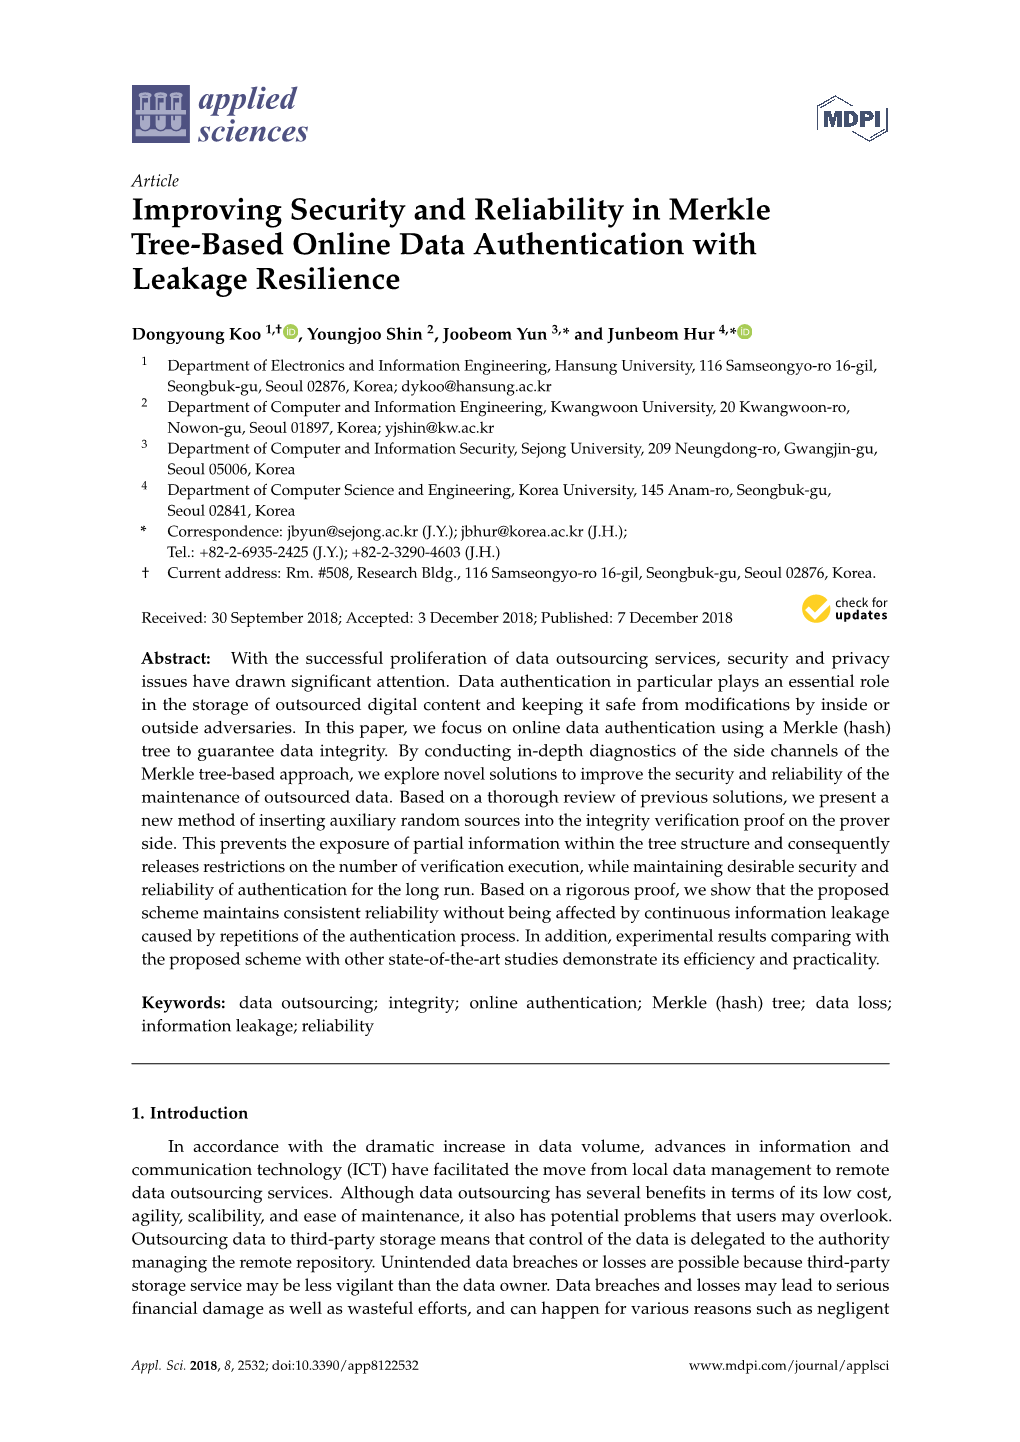 Improving Security and Reliability in Merkle Tree-Based Online Data Authentication with Leakage Resilience